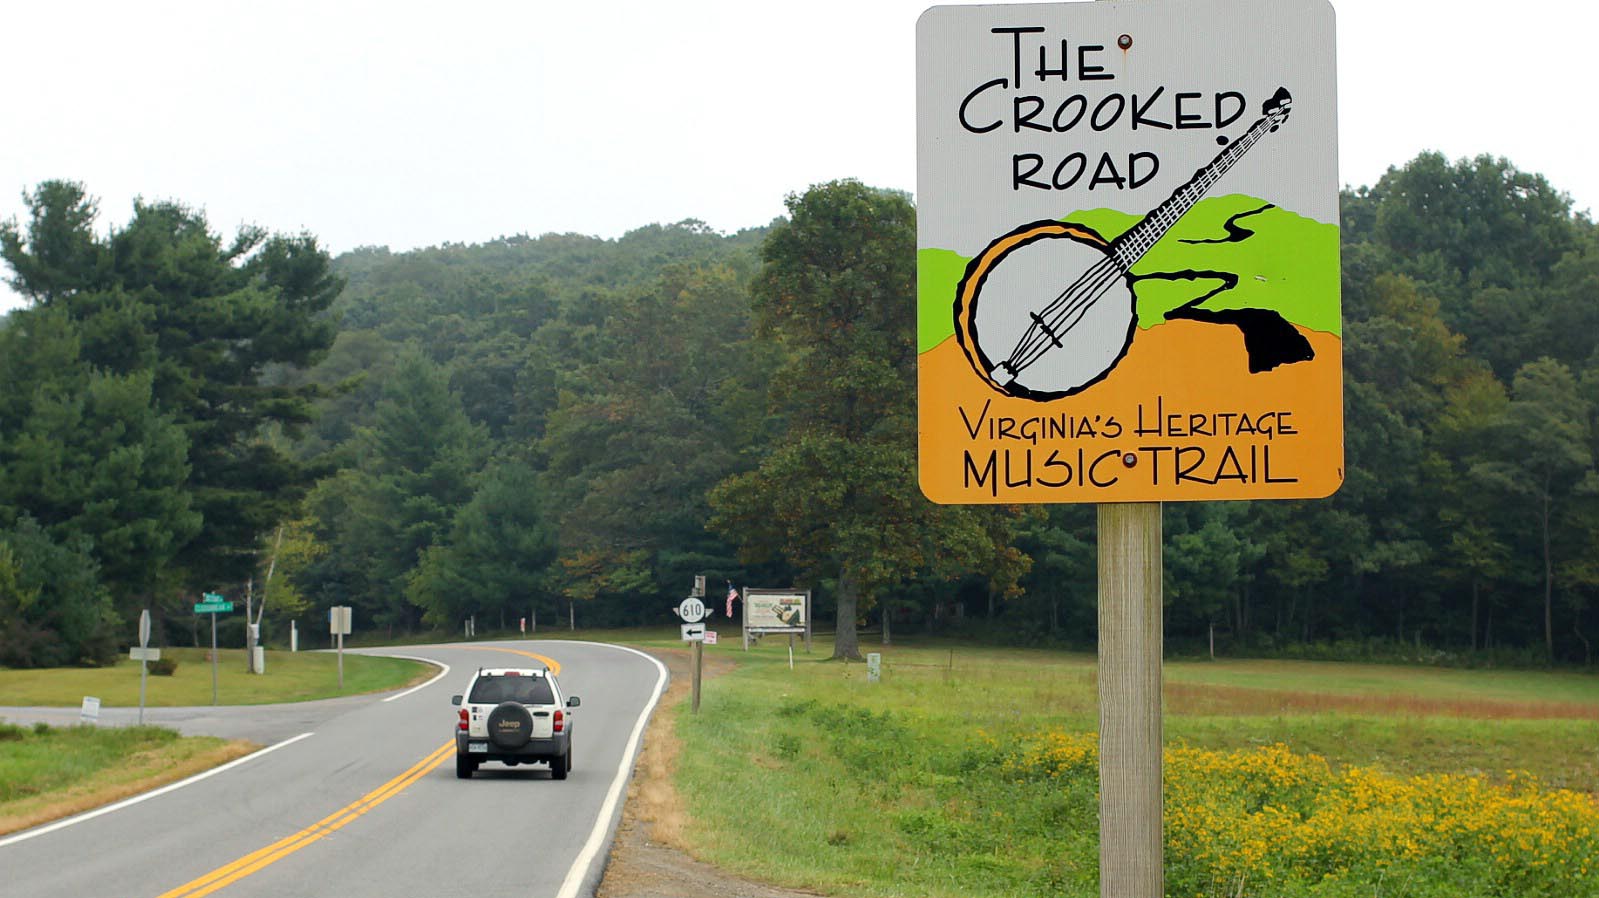 The Crooked Road: Heritage music trail